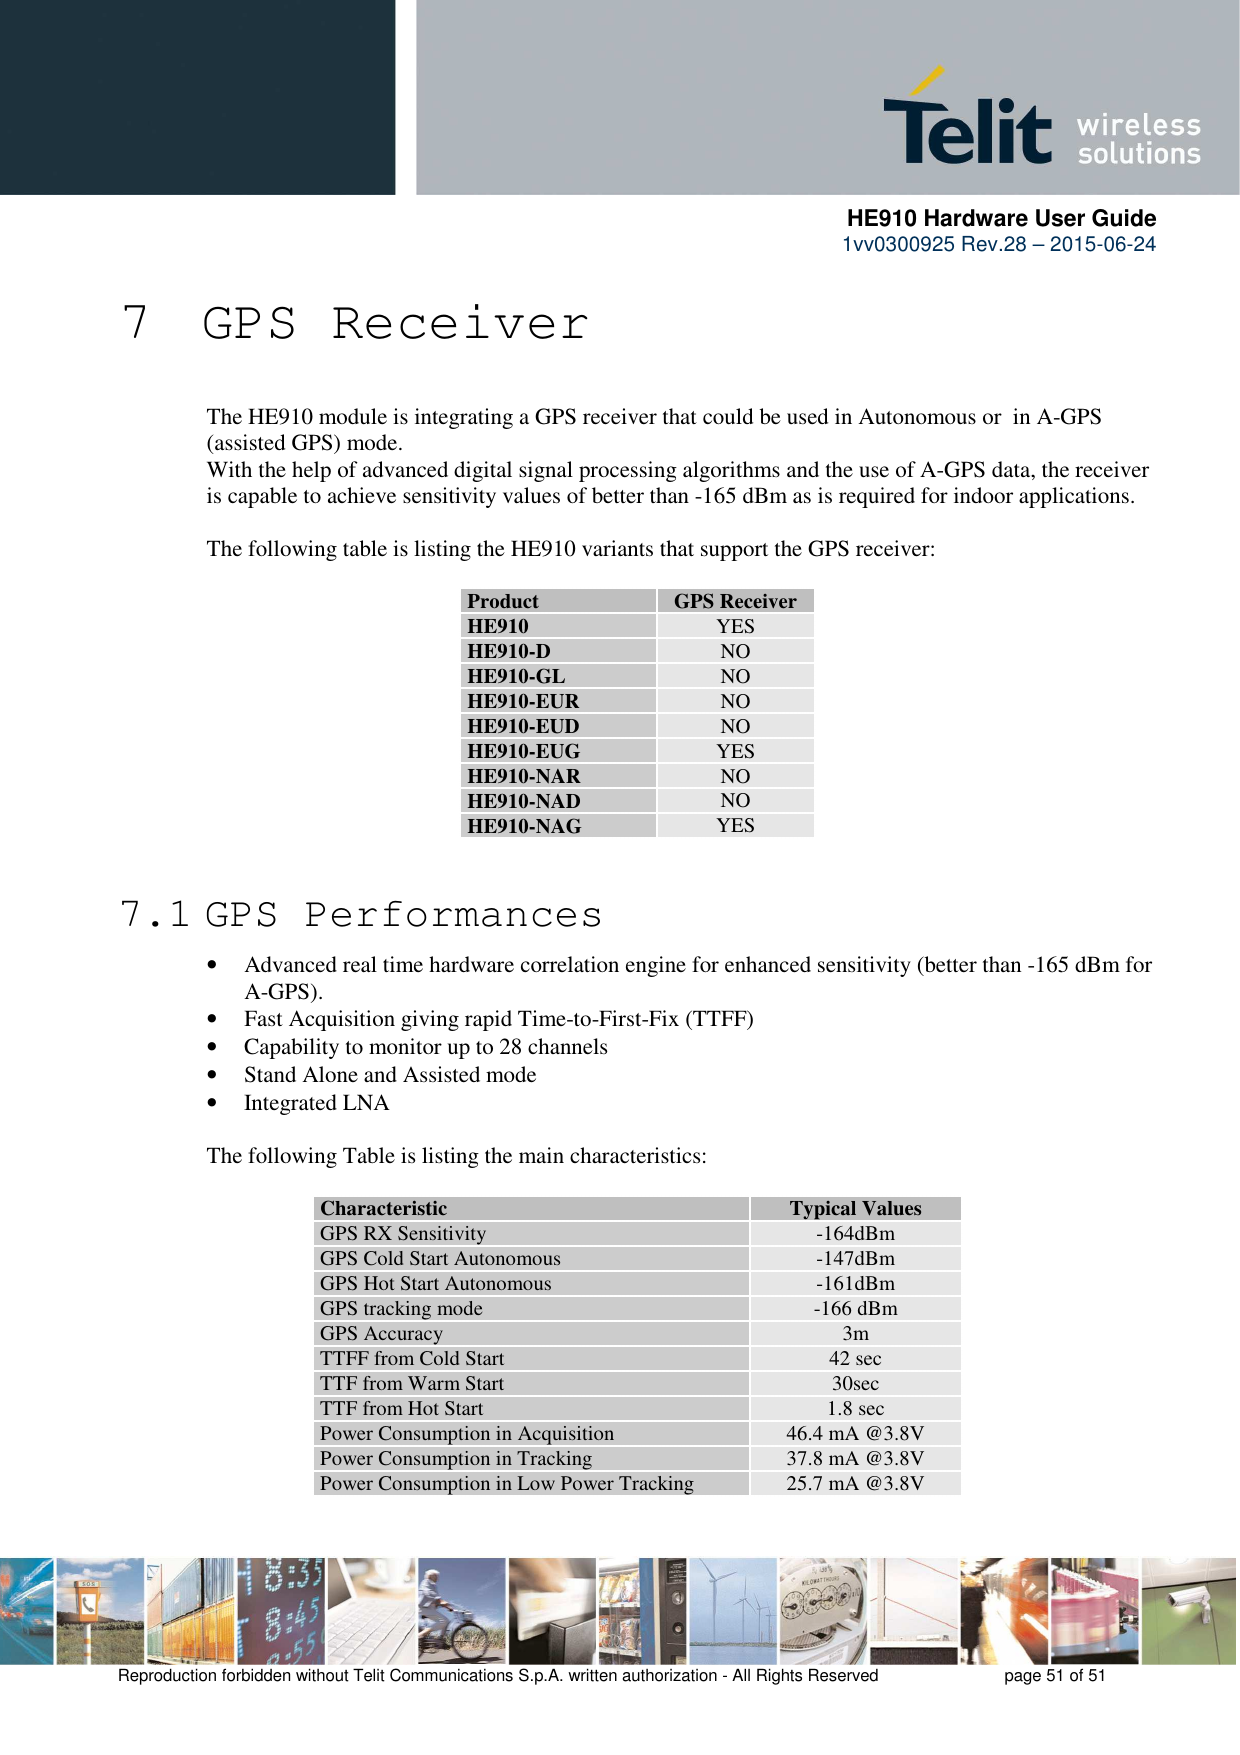      HE910 Hardware User Guide 1vv0300925 Rev.28 – 2015-06-24    Reproduction forbidden without Telit Communications S.p.A. written authorization - All Rights Reserved    page 51 of 51  7 GPS Receiver The HE910 module is integrating a GPS receiver that could be used in Autonomous or  in A-GPS (assisted GPS) mode. With the help of advanced digital signal processing algorithms and the use of A-GPS data, the receiver is capable to achieve sensitivity values of better than -165 dBm as is required for indoor applications.   The following table is listing the HE910 variants that support the GPS receiver:  Product  GPS Receiver HE910  YES HE910-D  NO HE910-GL  NO HE910-EUR  NO HE910-EUD  NO HE910-EUG  YES HE910-NAR  NO HE910-NAD  NO HE910-NAG  YES  7.1 GPS Performances • Advanced real time hardware correlation engine for enhanced sensitivity (better than -165 dBm for A-GPS). • Fast Acquisition giving rapid Time-to-First-Fix (TTFF) • Capability to monitor up to 28 channels • Stand Alone and Assisted mode • Integrated LNA  The following Table is listing the main characteristics:  Characteristic  Typical Values GPS RX Sensitivity  -164dBm GPS Cold Start Autonomous  -147dBm GPS Hot Start Autonomous  -161dBm GPS tracking mode  -166 dBm GPS Accuracy  3m  TTFF from Cold Start  42 sec TTF from Warm Start  30sec TTF from Hot Start  1.8 sec Power Consumption in Acquisition  46.4 mA @3.8V Power Consumption in Tracking  37.8 mA @3.8V Power Consumption in Low Power Tracking  25.7 mA @3.8V  